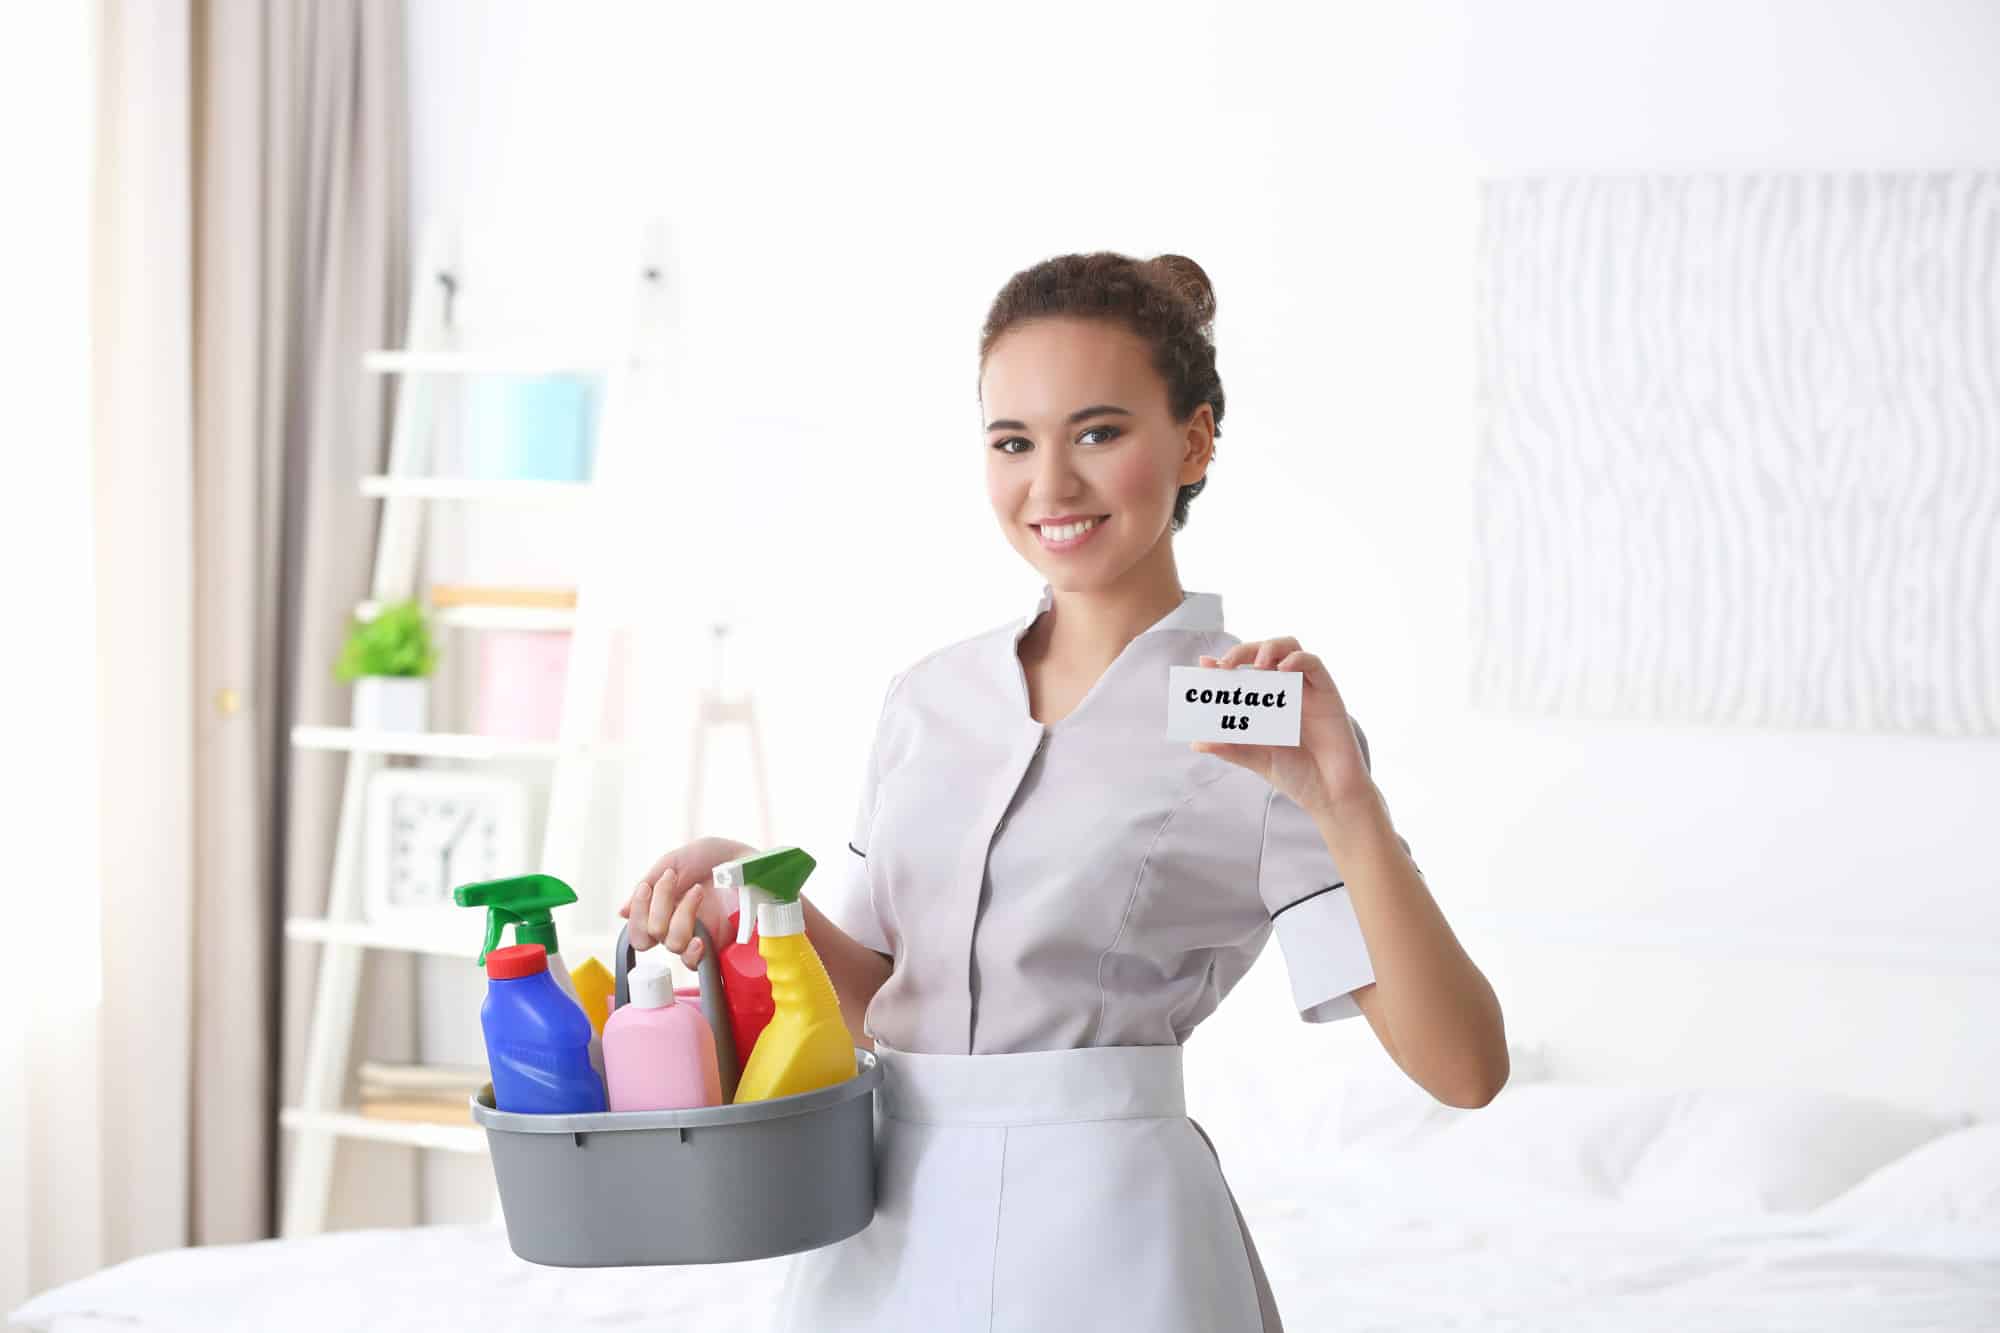 Daily Dose of Clean: Life Hacks from a Professional Housekeeper